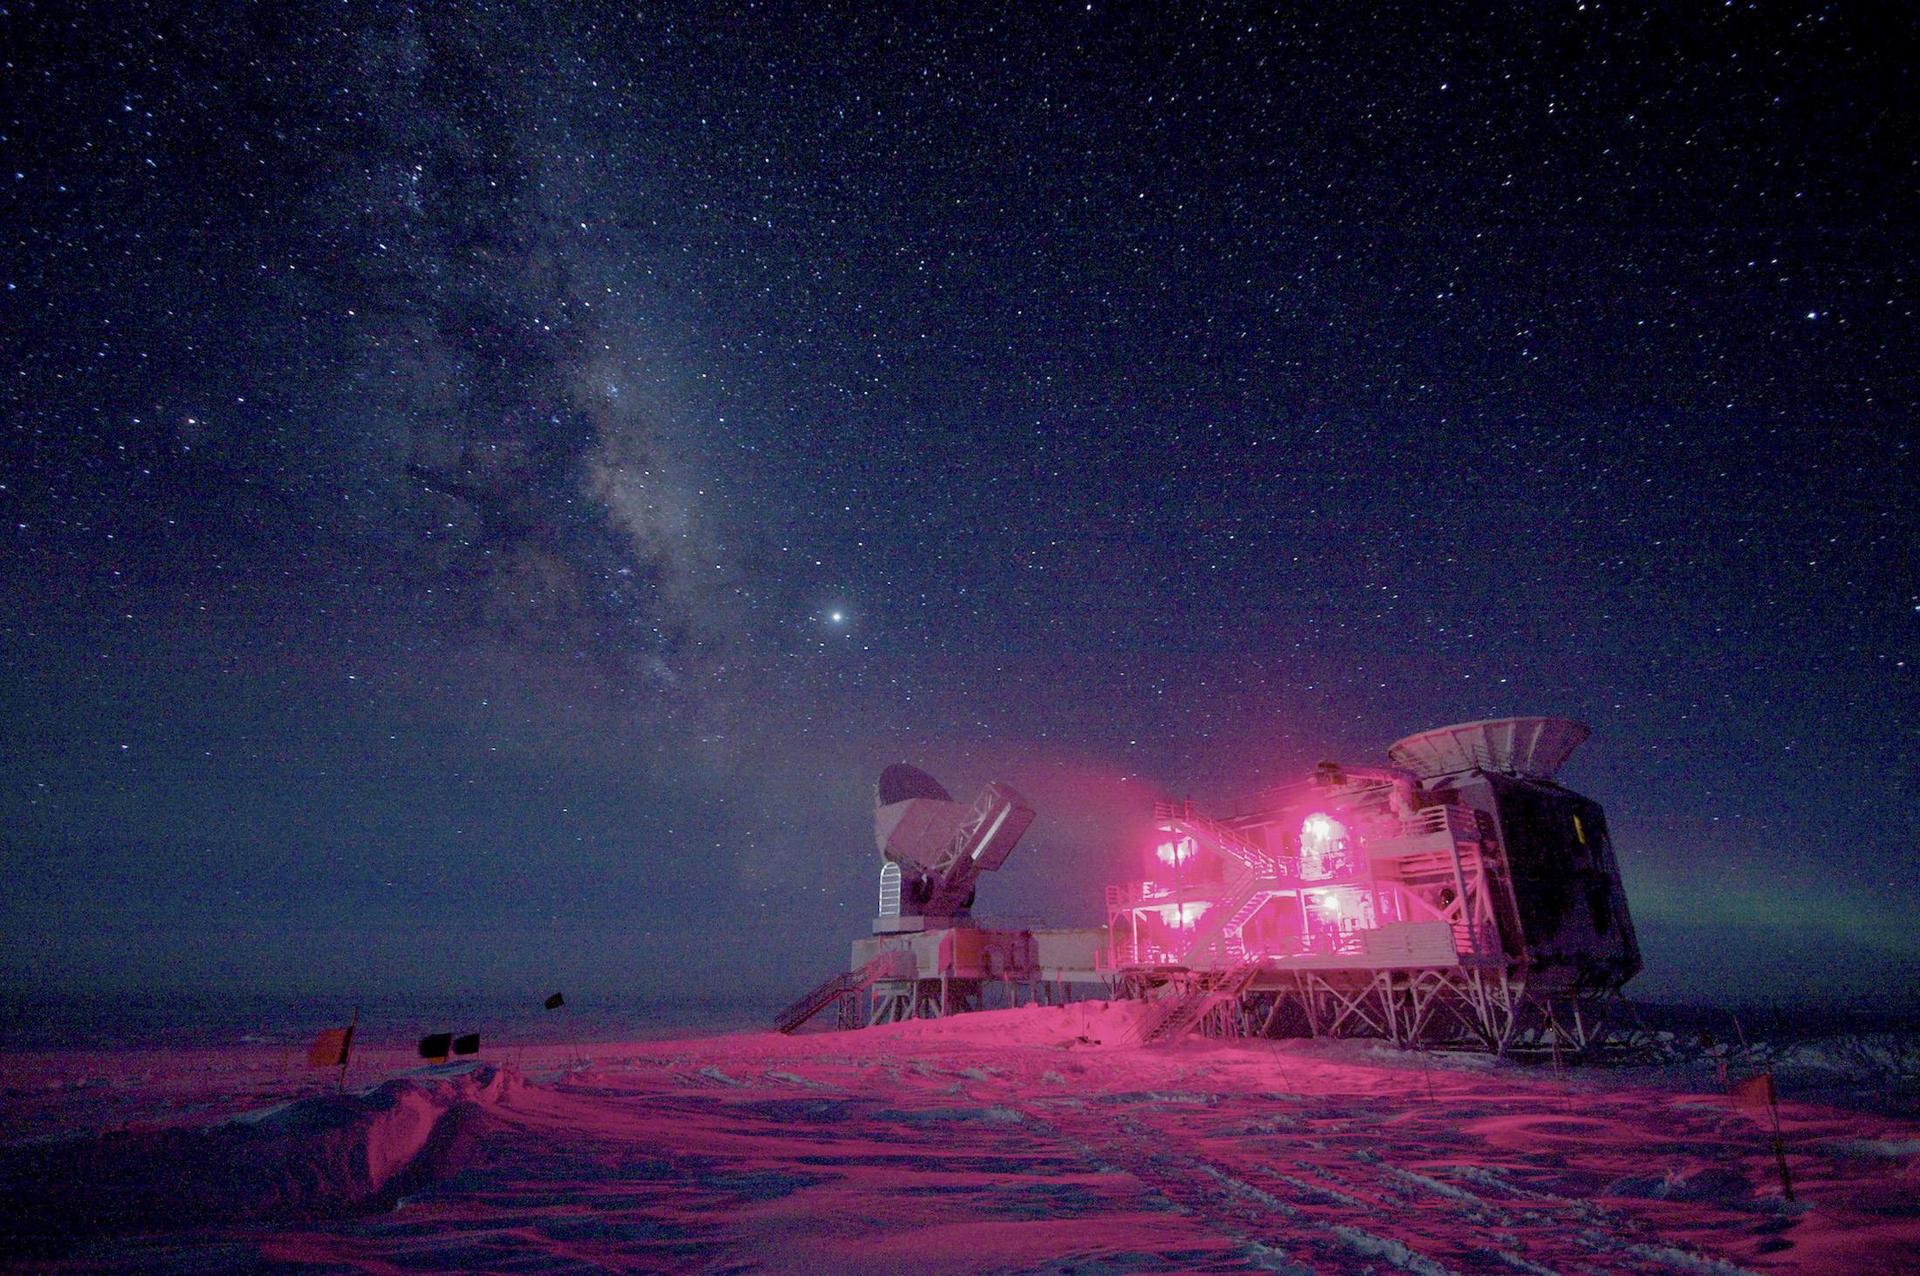 The BICEP and the South Pole telescopes seen against the night sky as they search for signals from the heavens that provide clues to the expansion of space in the early universe. Photo: Reuters